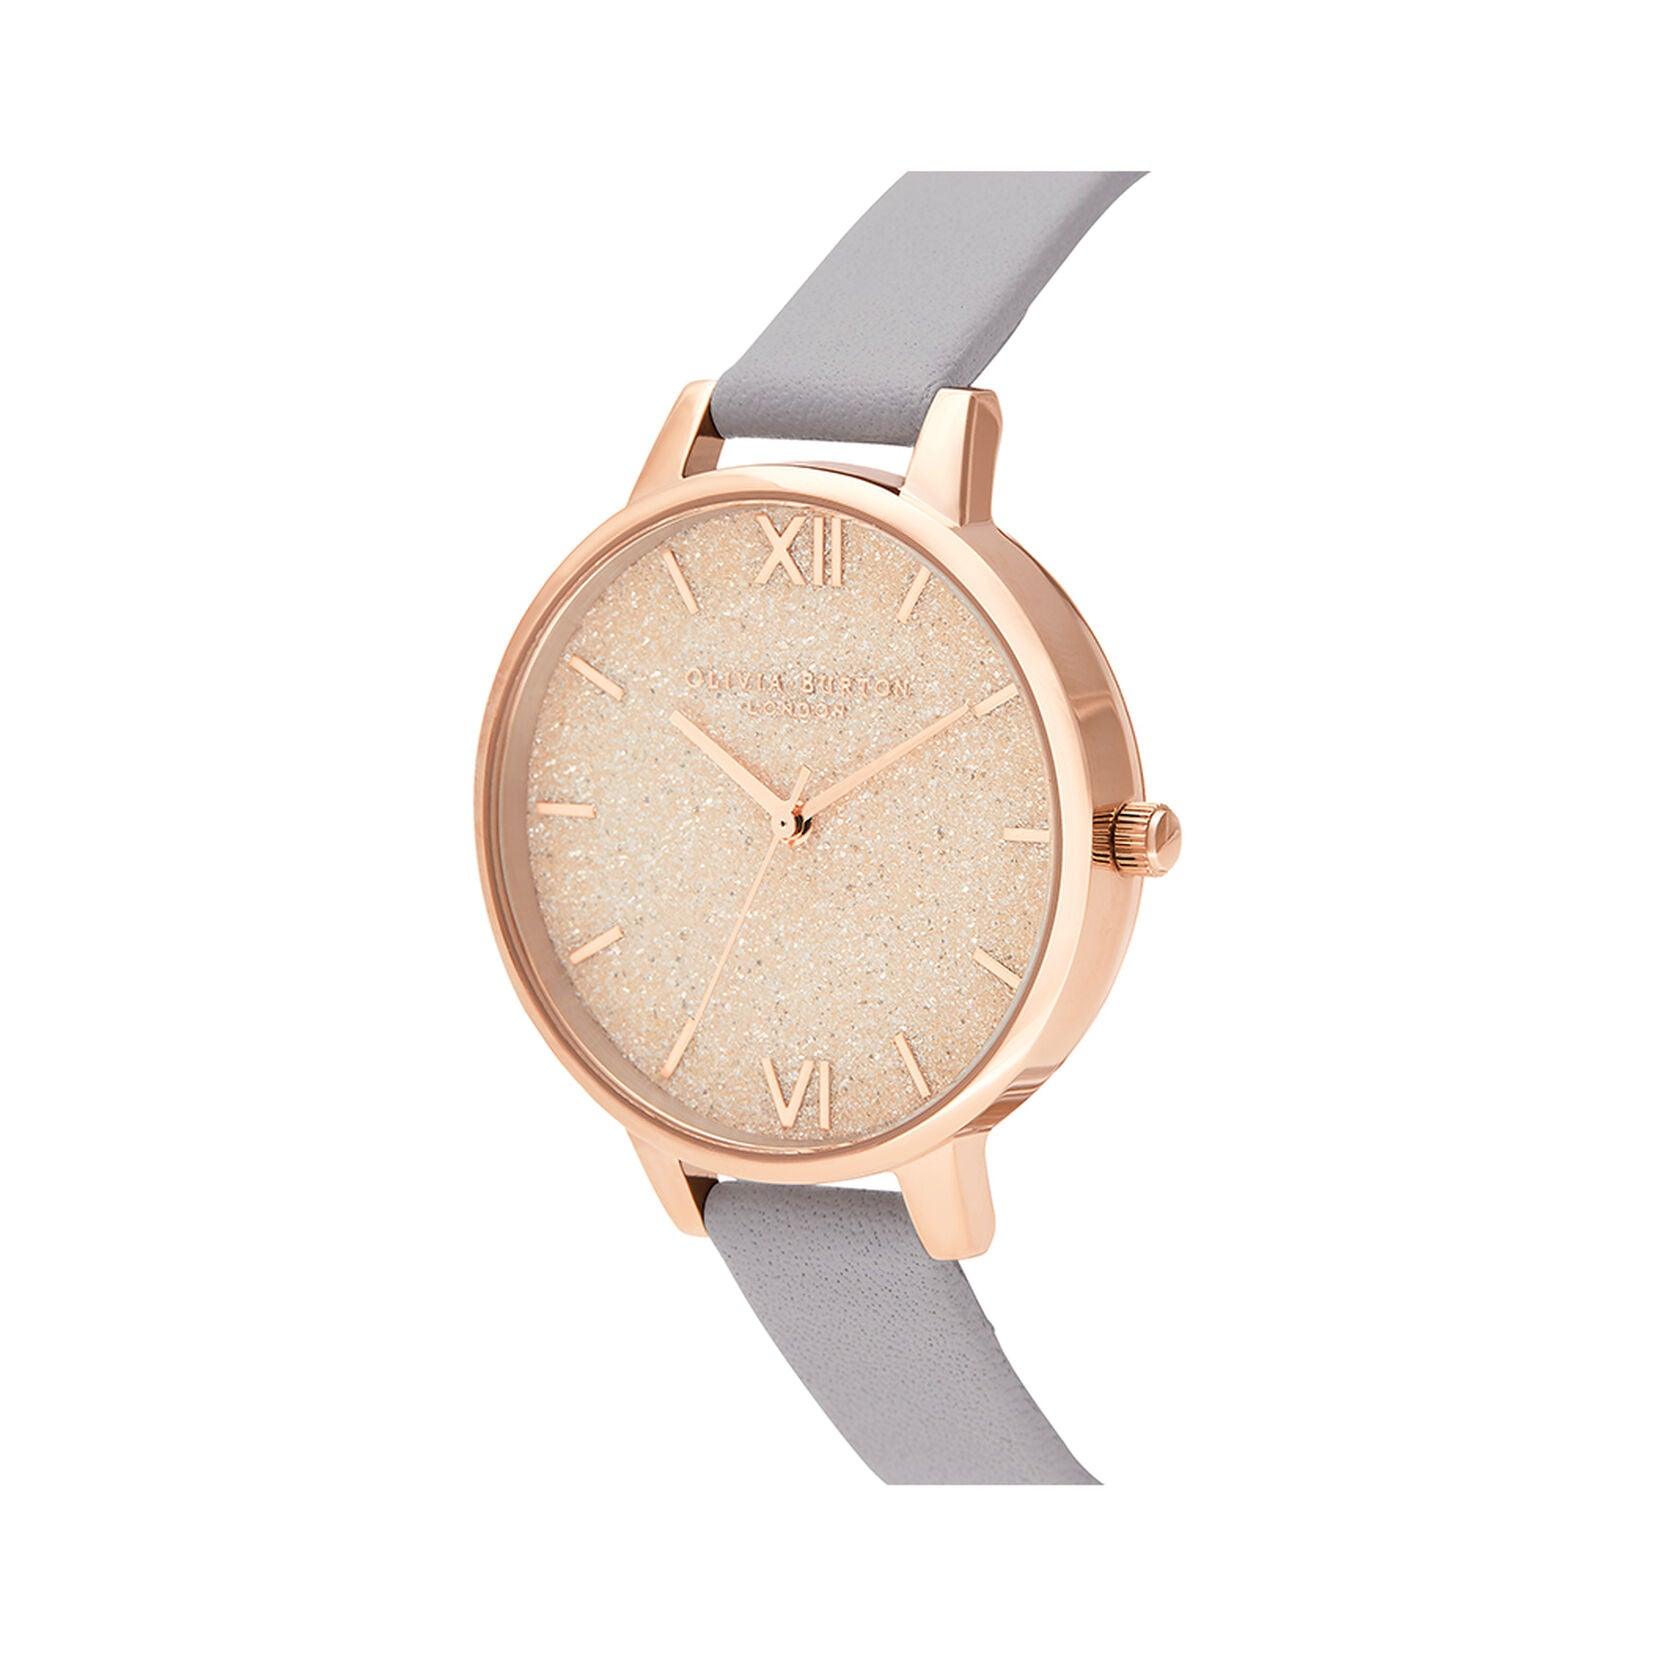 Olivia Burton Glitter Dial Pale Gold Watch with Grey Leather Strap OB16GD45 - Judith Hart Jewellers